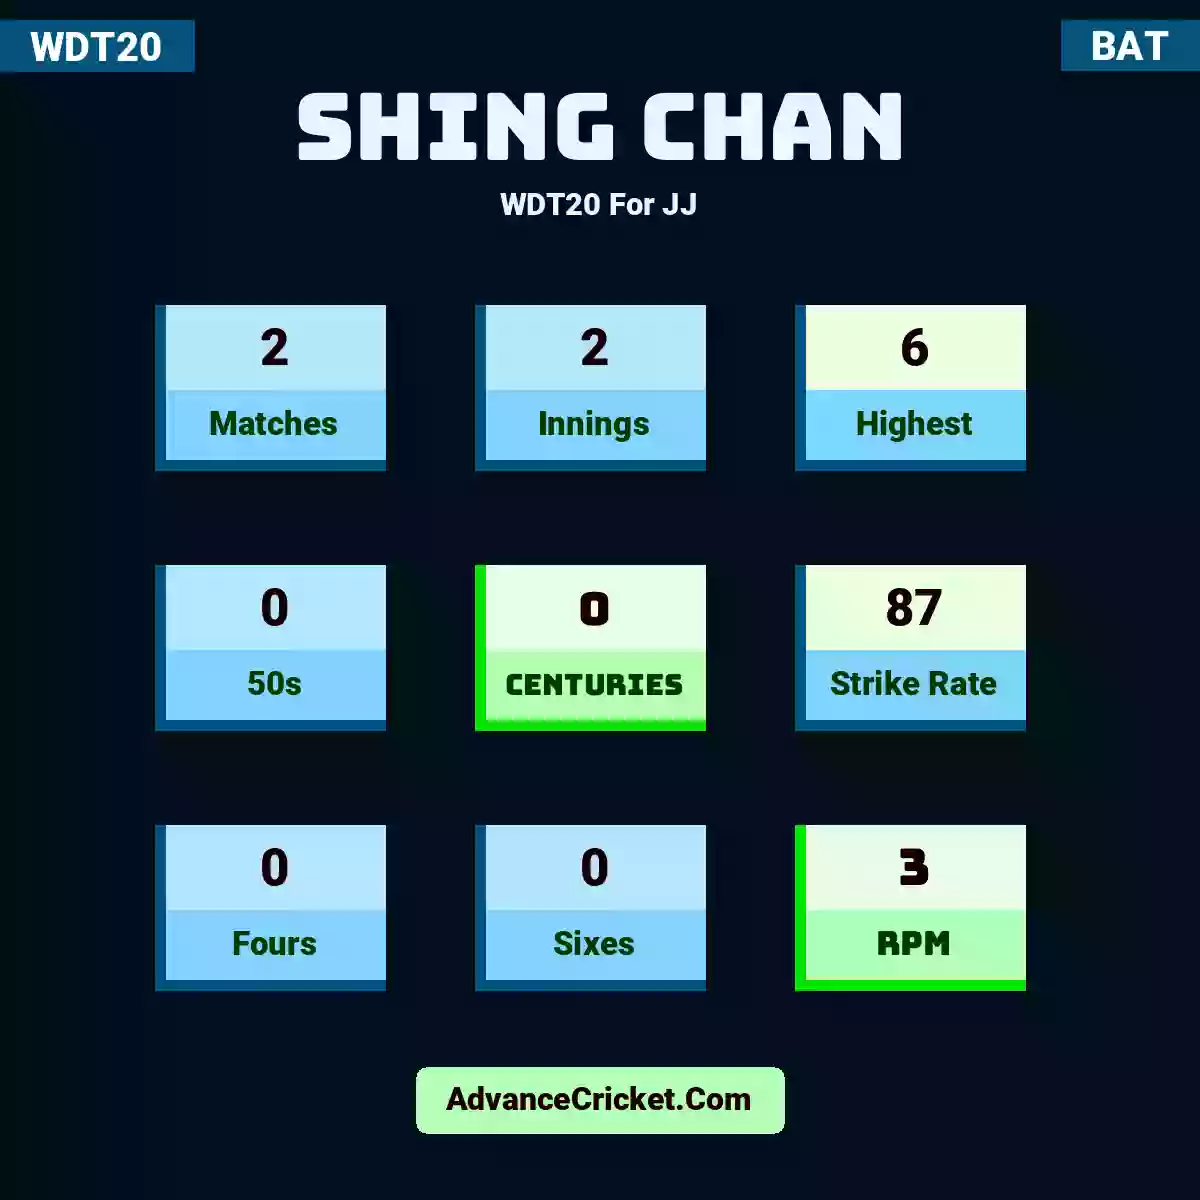 Shing Chan WDT20  For JJ, Shing Chan played 2 matches, scored 6 runs as highest, 0 half-centuries, and 0 centuries, with a strike rate of 87. S.Chan hit 0 fours and 0 sixes, with an RPM of 3.